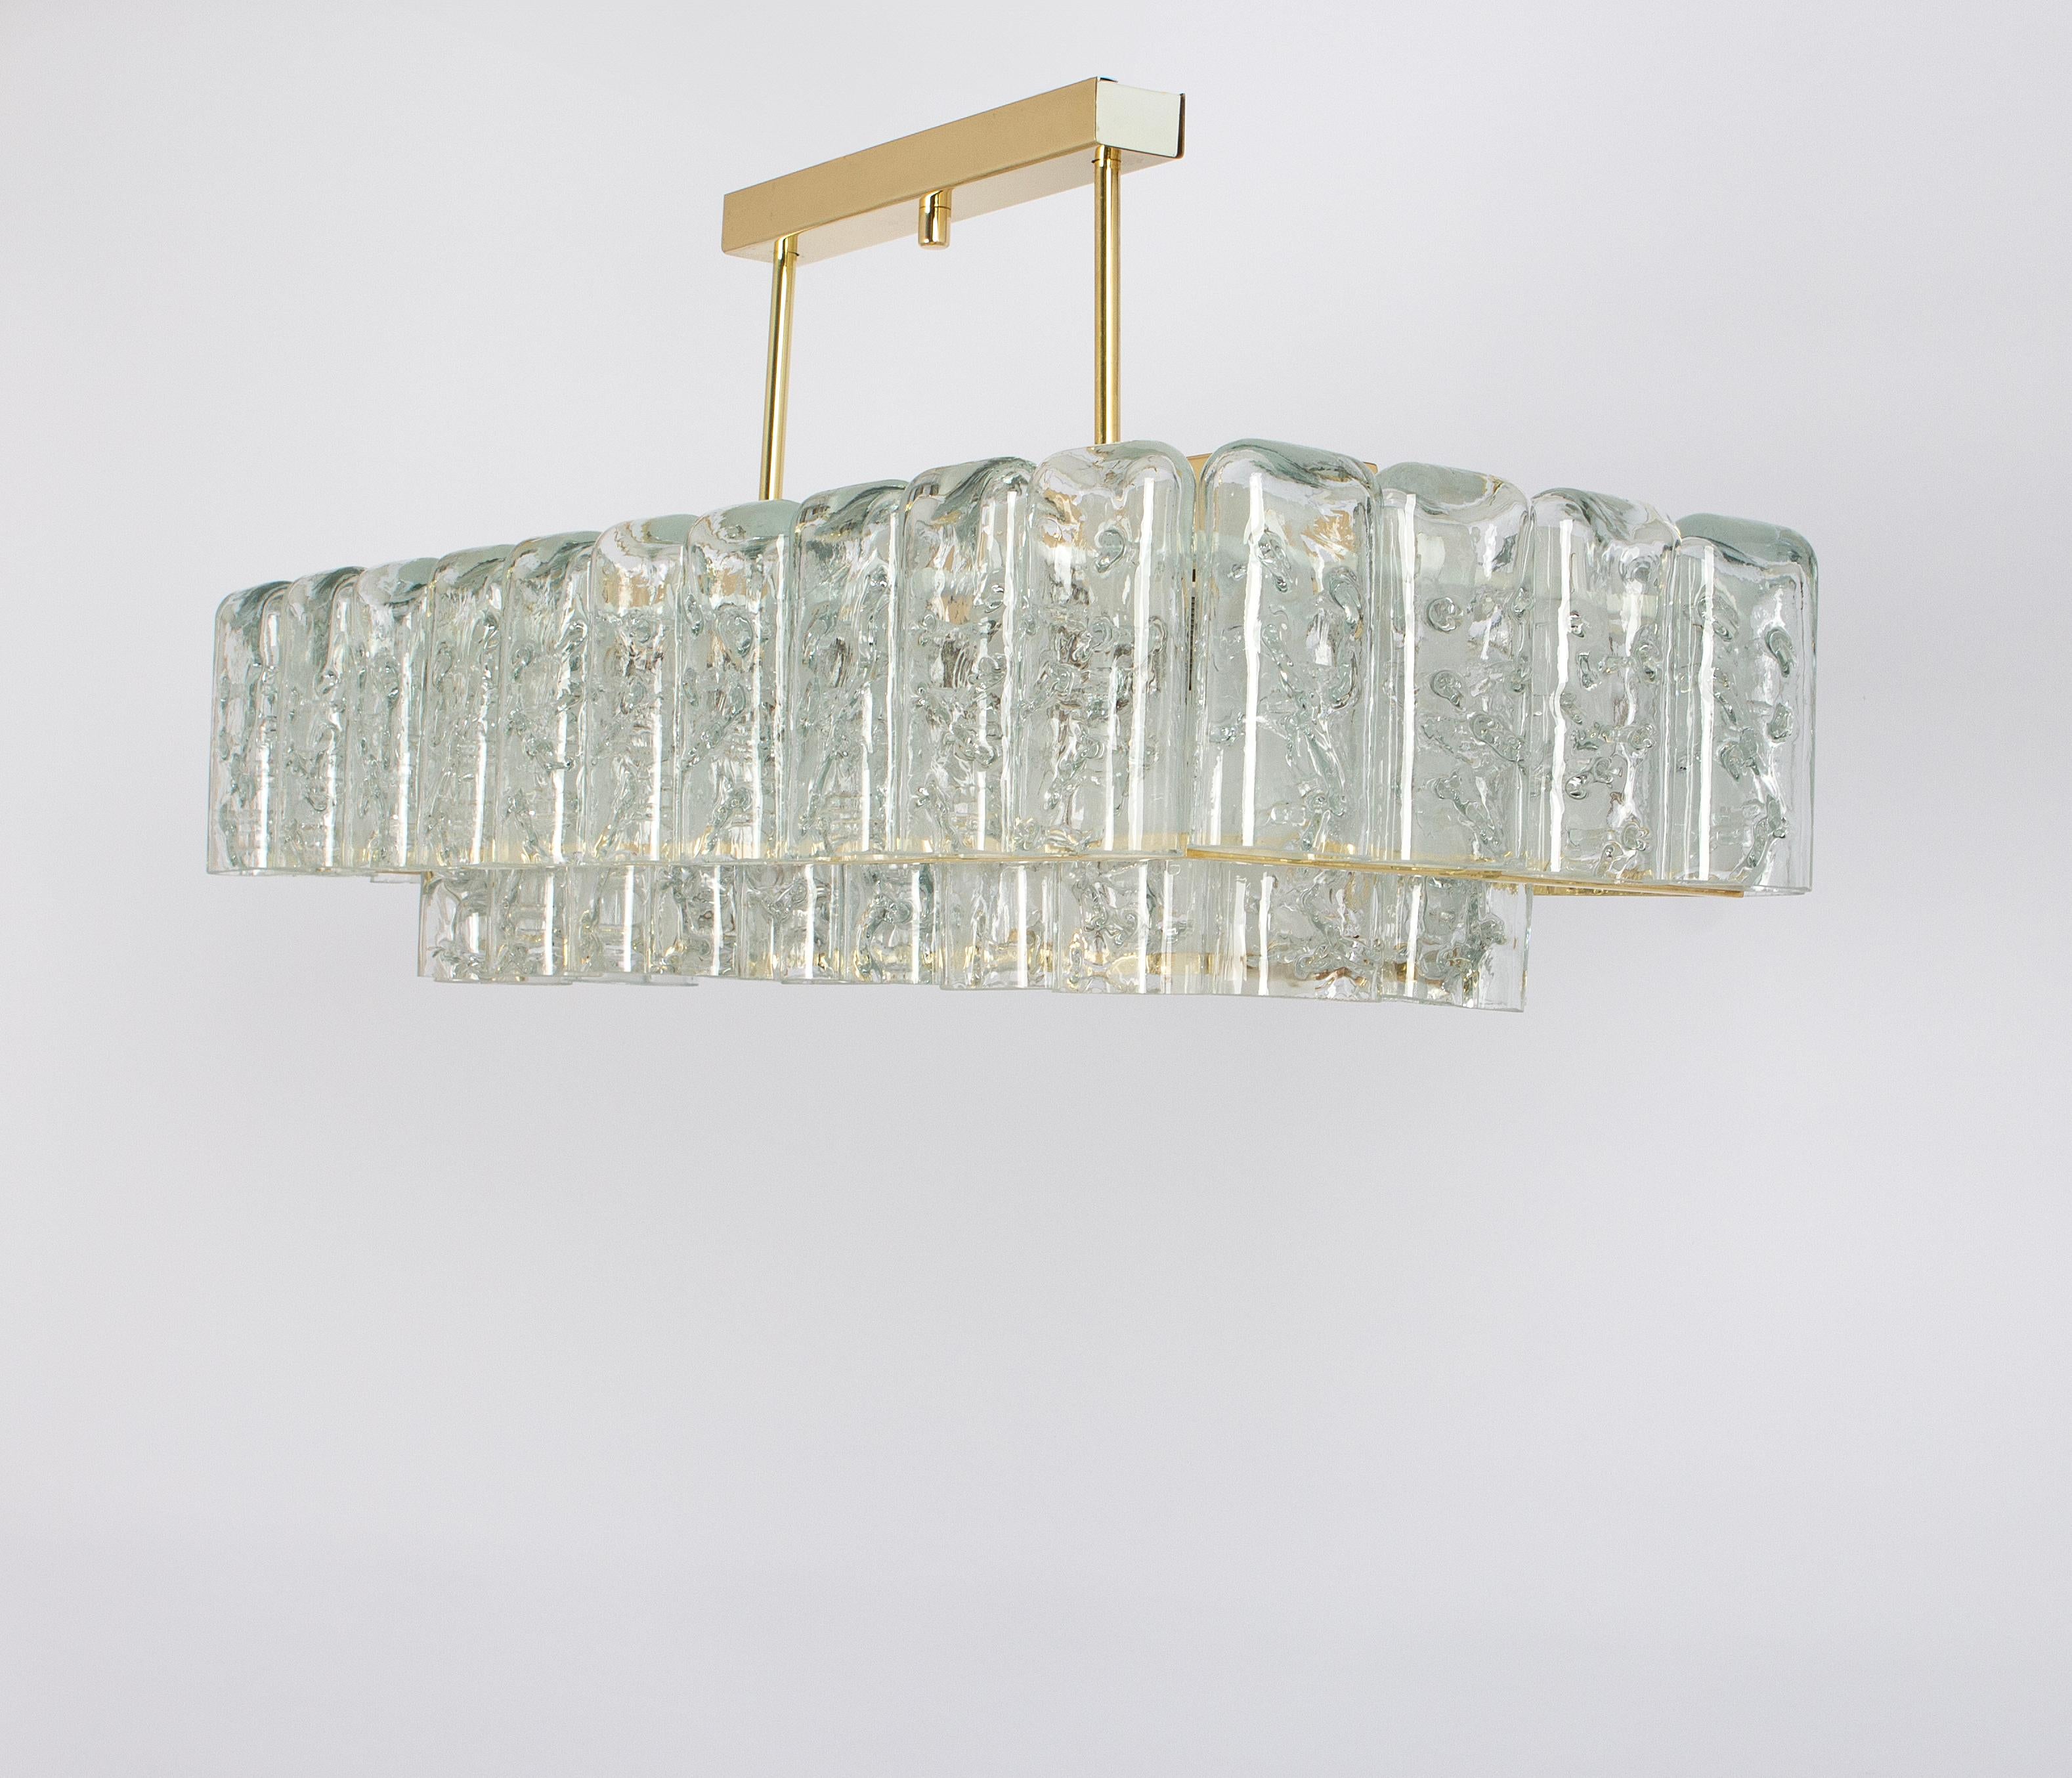 Fantastic two-tier midcentury chandelier by Doria, Germany, manufactured circa 1960-1969. 2 rings of Murano glass cylinders suspended from a fixture.
Wonderful light effect.

Sockets: 9 x E14 candelabra bulbs (up to 40 W each) .
Light bulbs are not